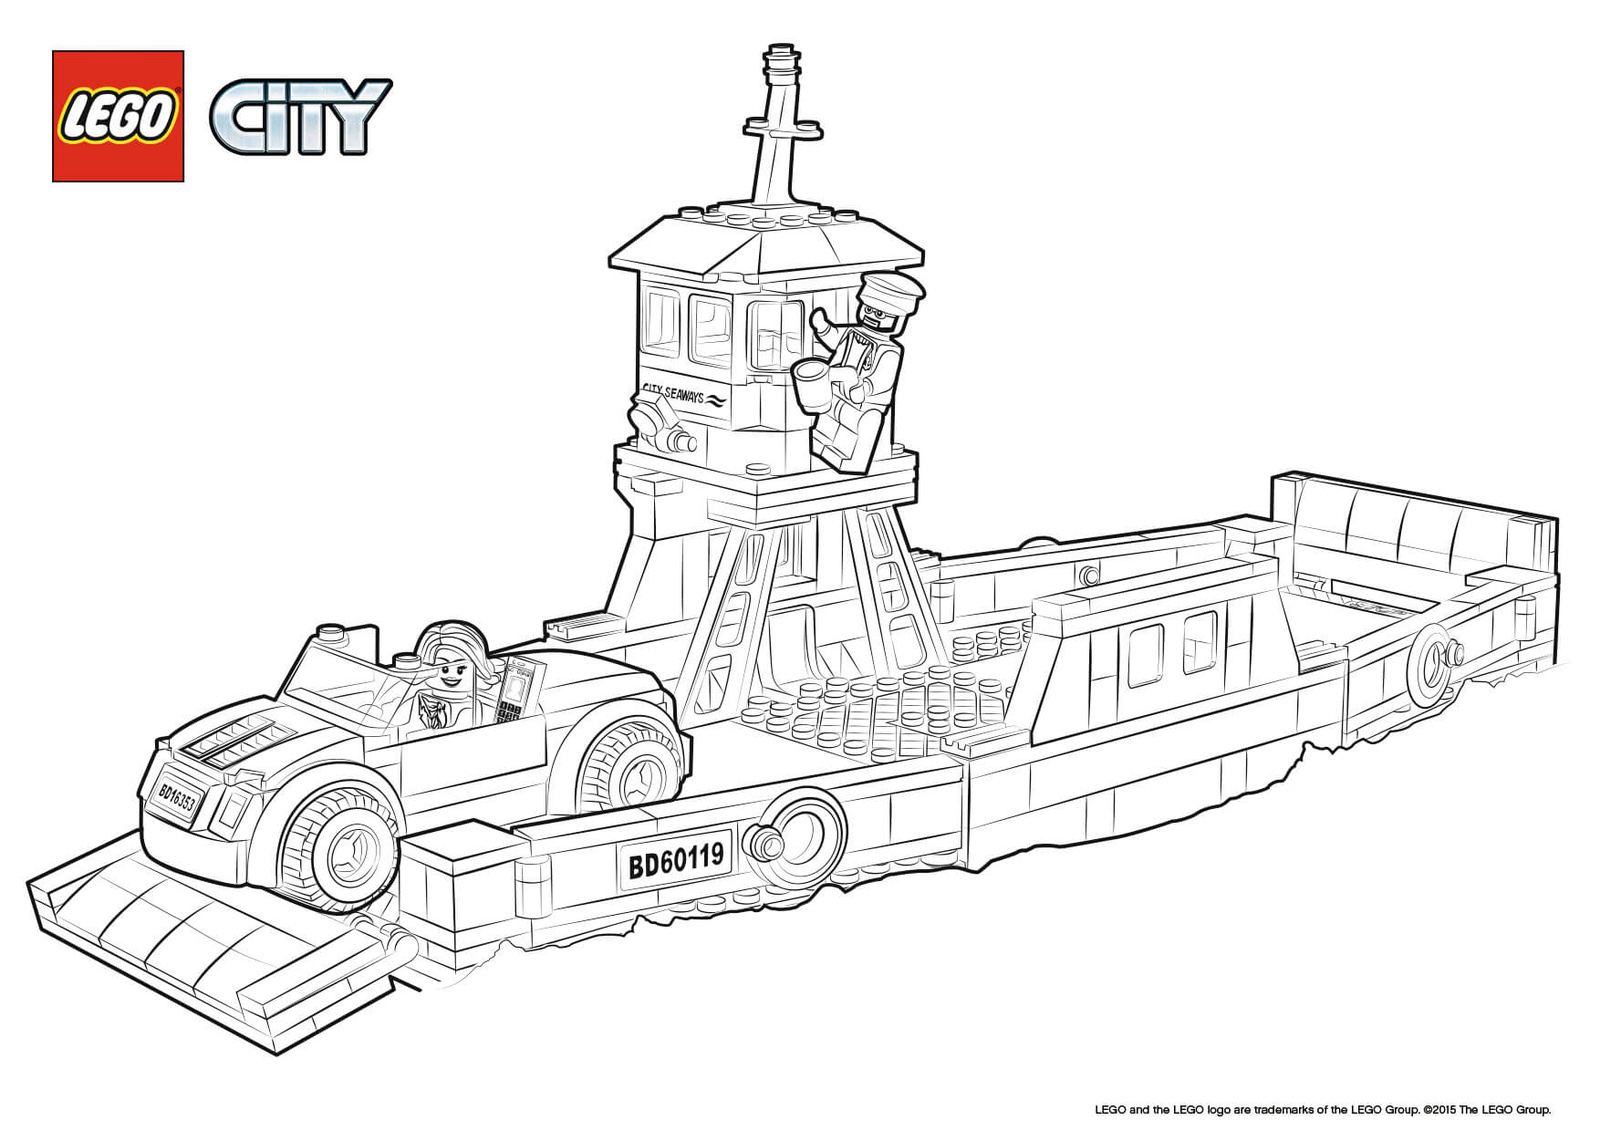 Lego city Coloring pages 🖌 to print and color